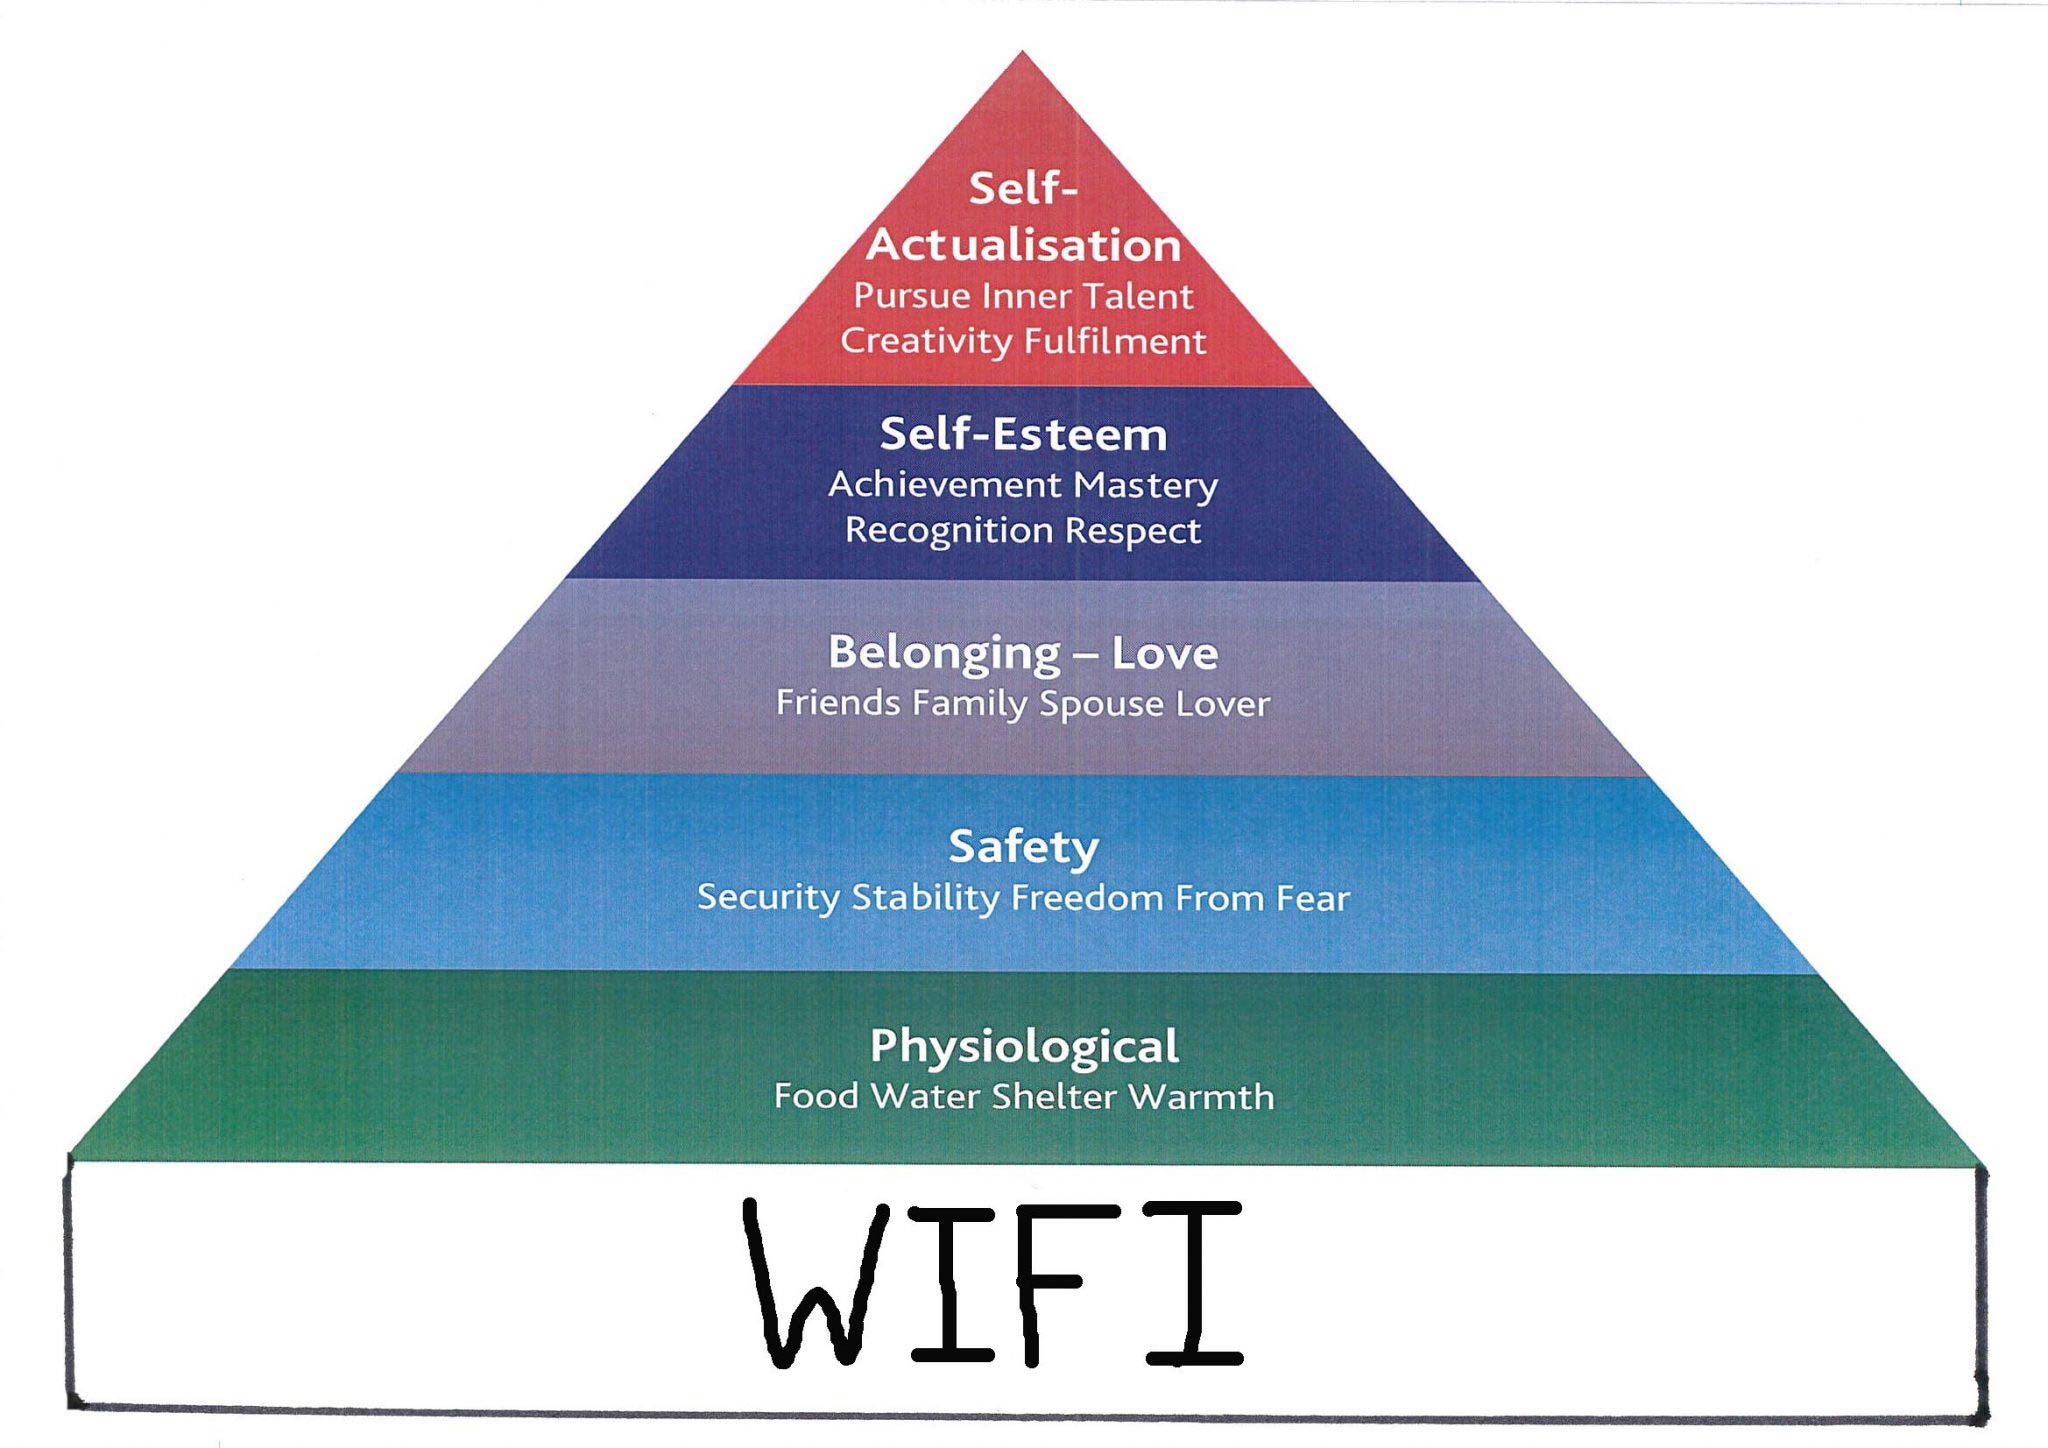 The Updated & Modern Version Of Maslow's Hierarchy Of Needs,